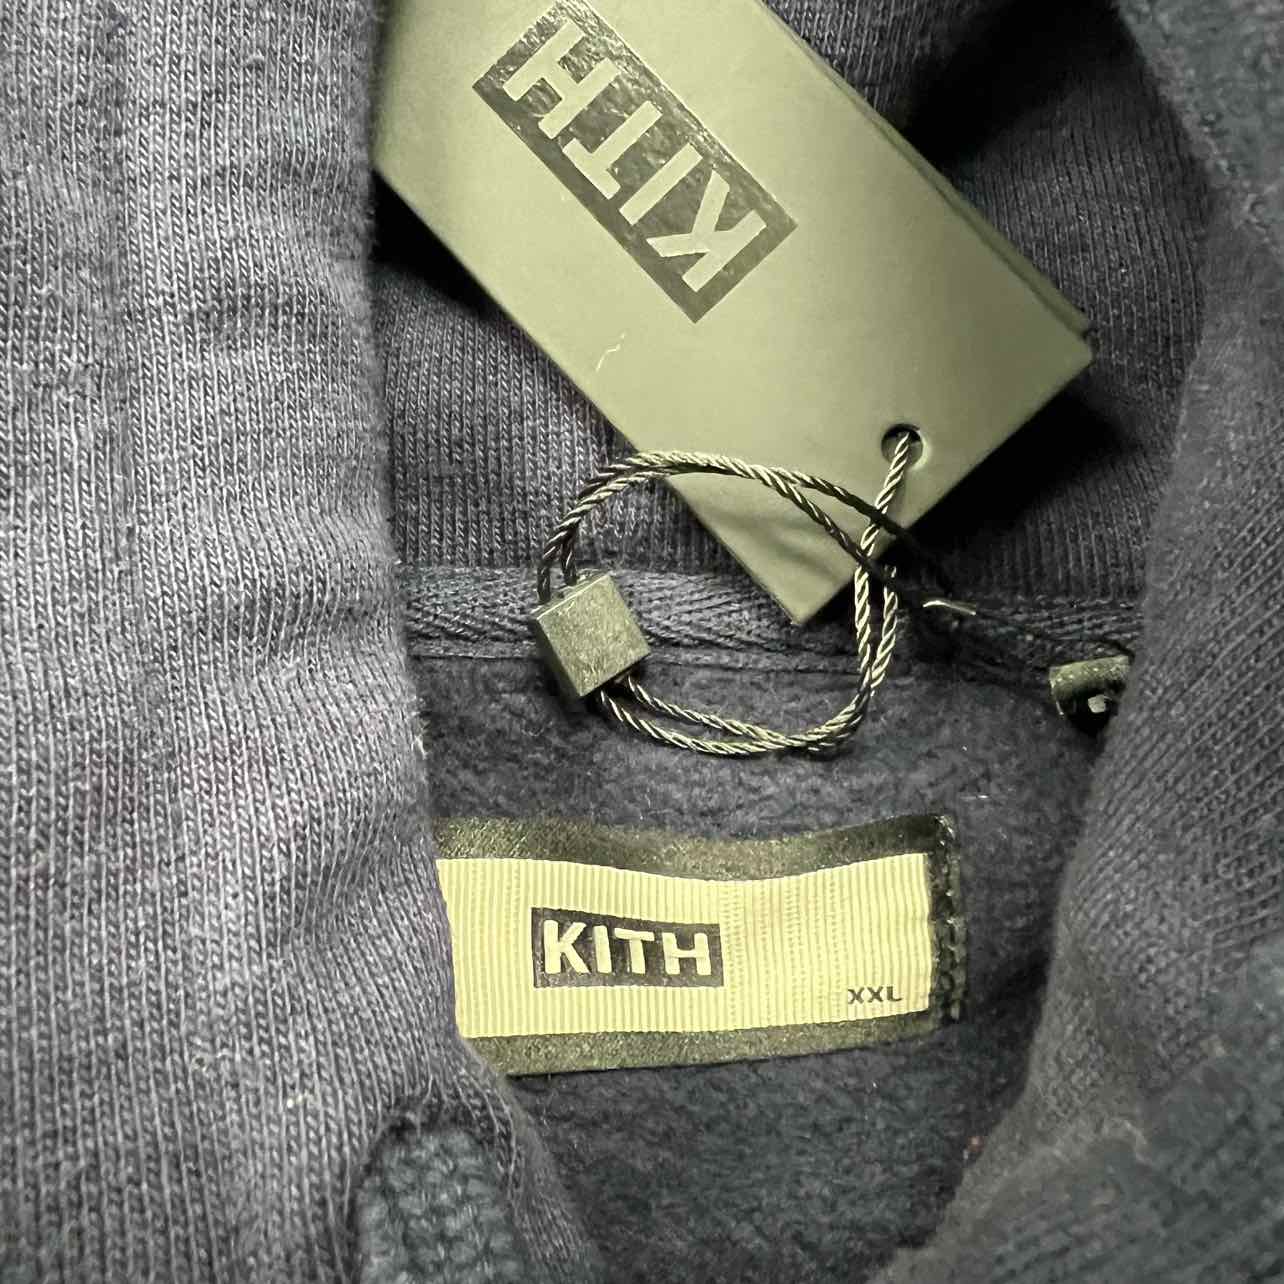 Kith Hoodie &quot;EQUALITY&quot; Navy New Size 2XL